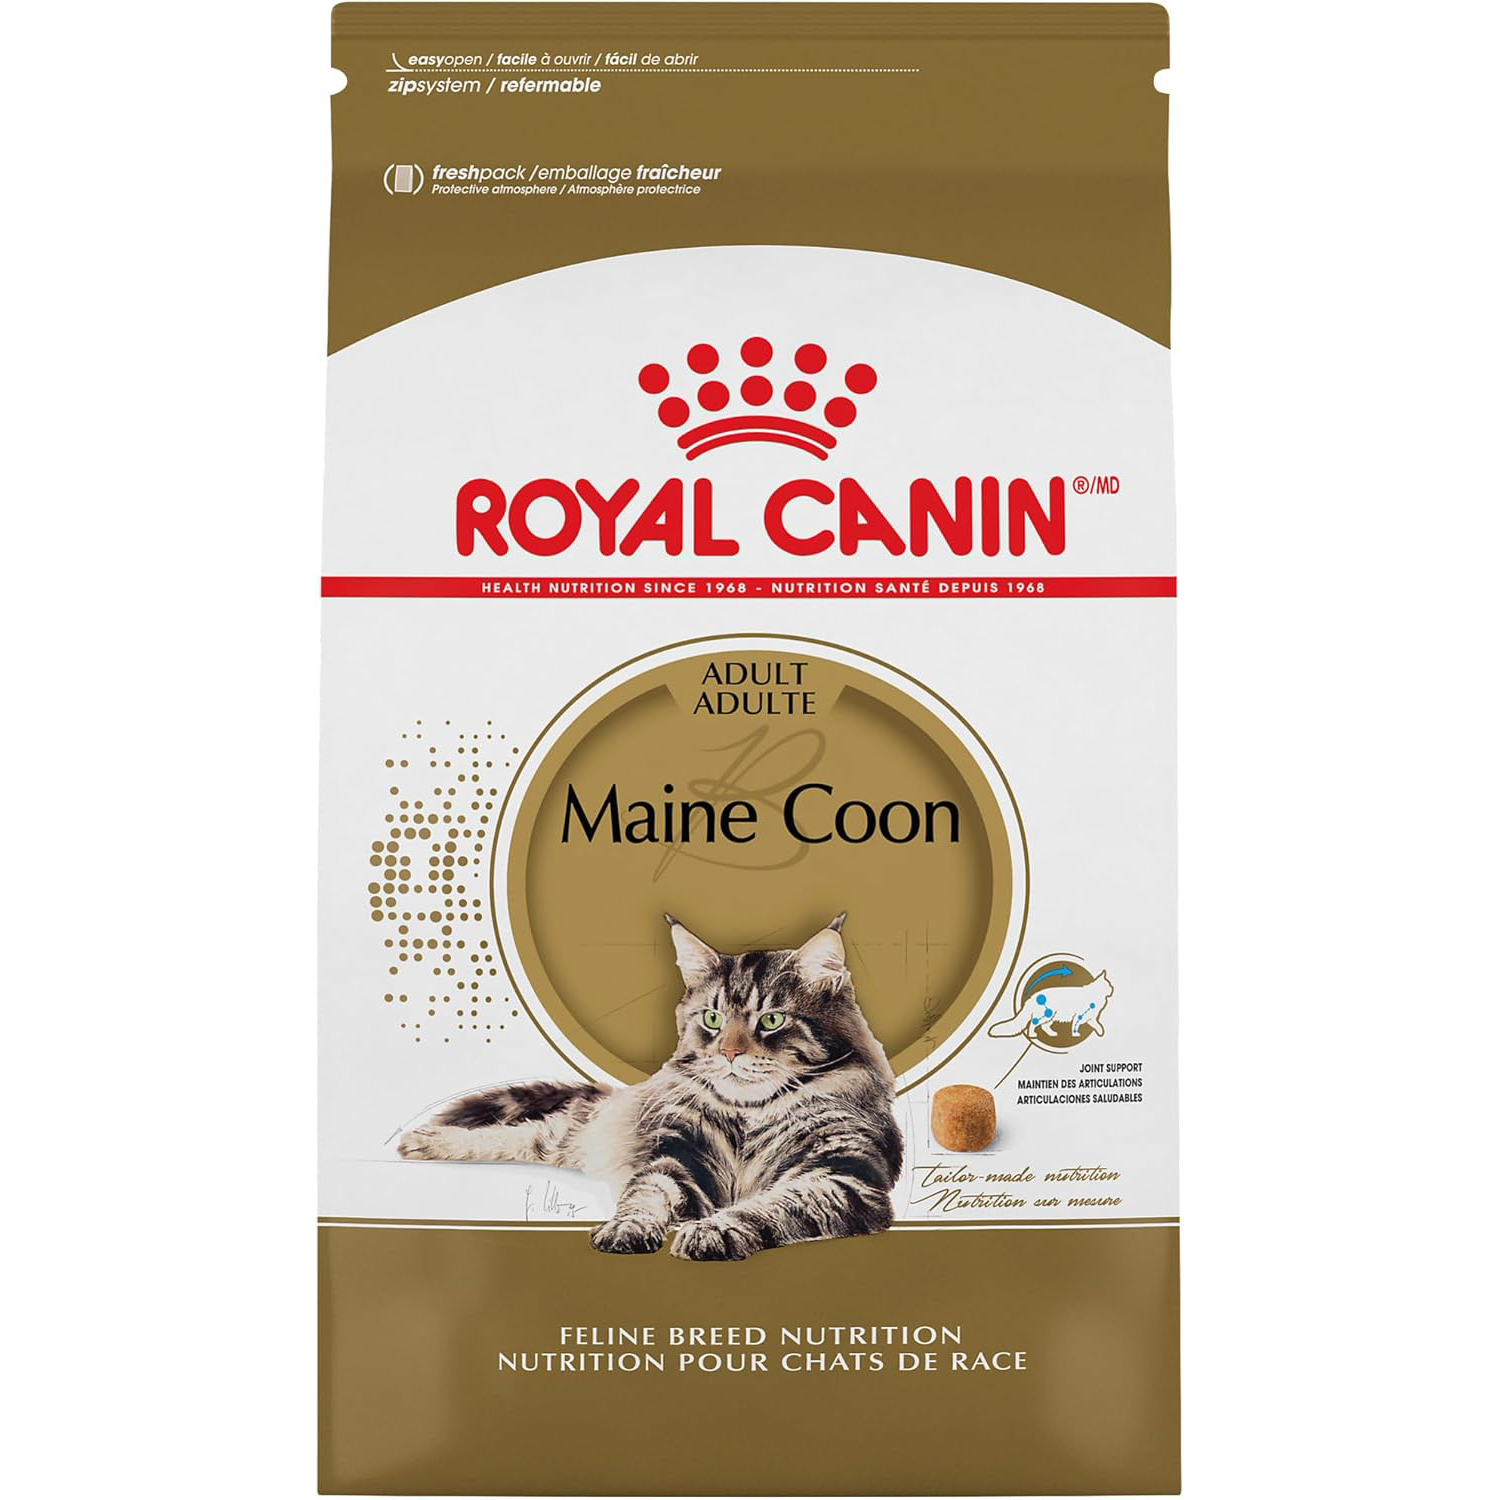 Royal Canin Feline Breed Maine Coon Canned Cat Food